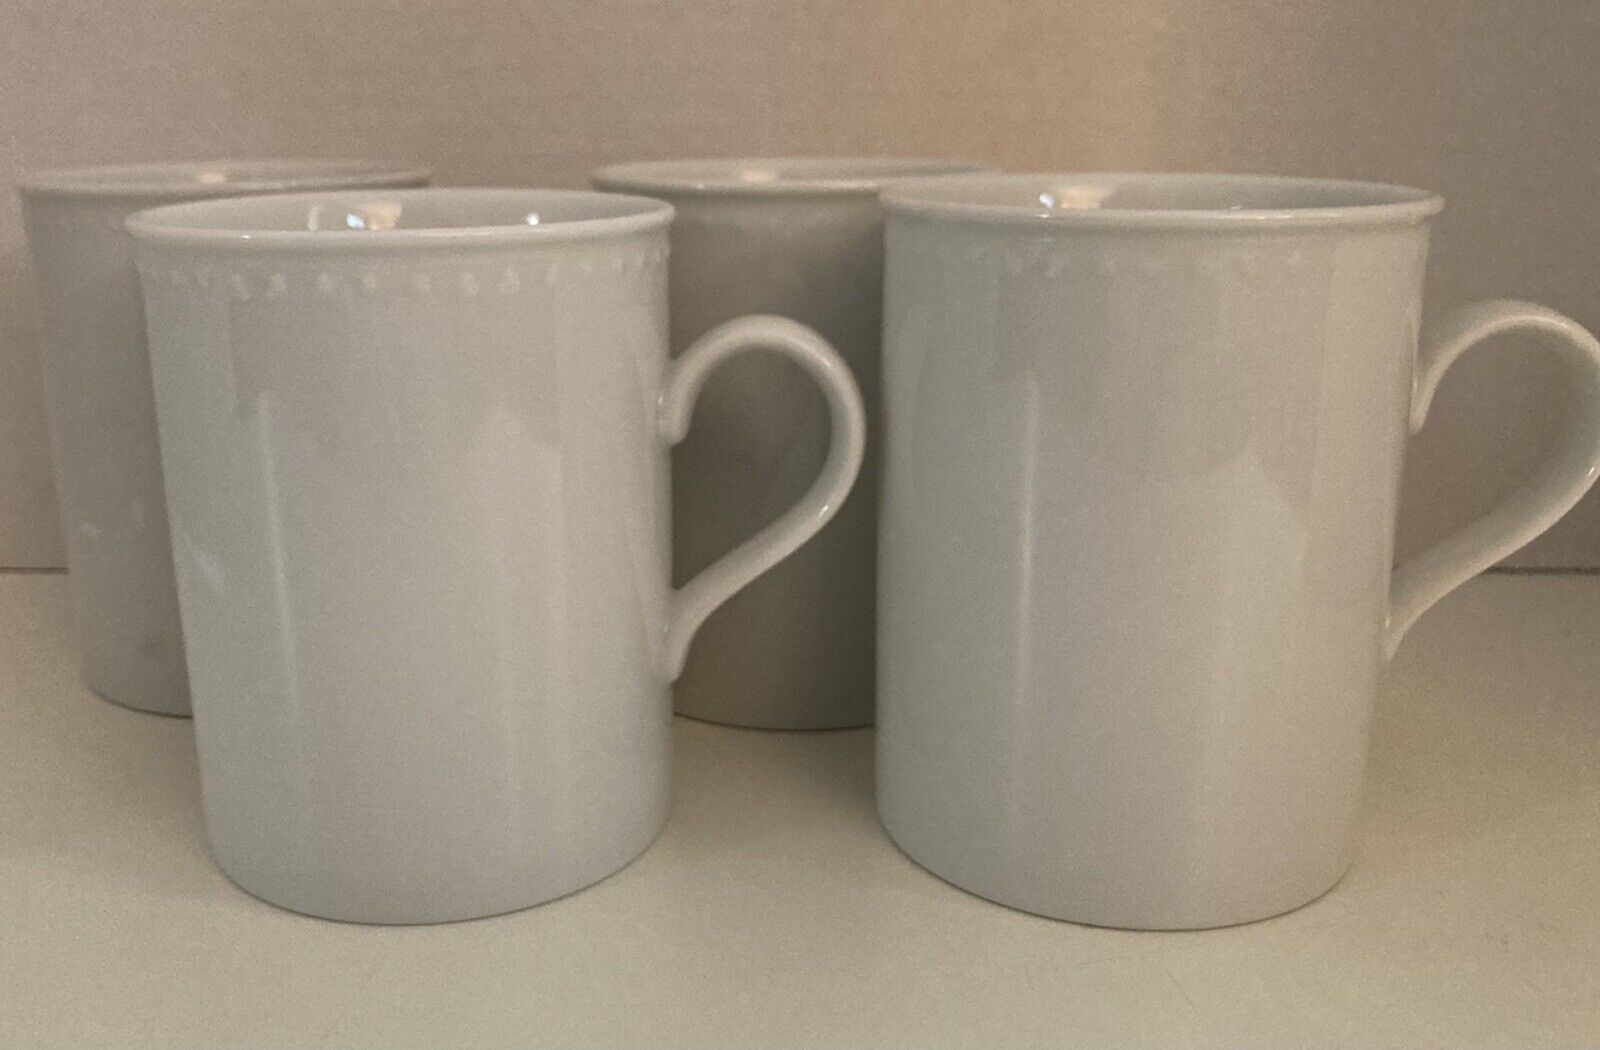 4 Crate & Barrel Staccato White Coffee Mugs Kathleen Wills Japan 3 7/8" Dotted - $34.53